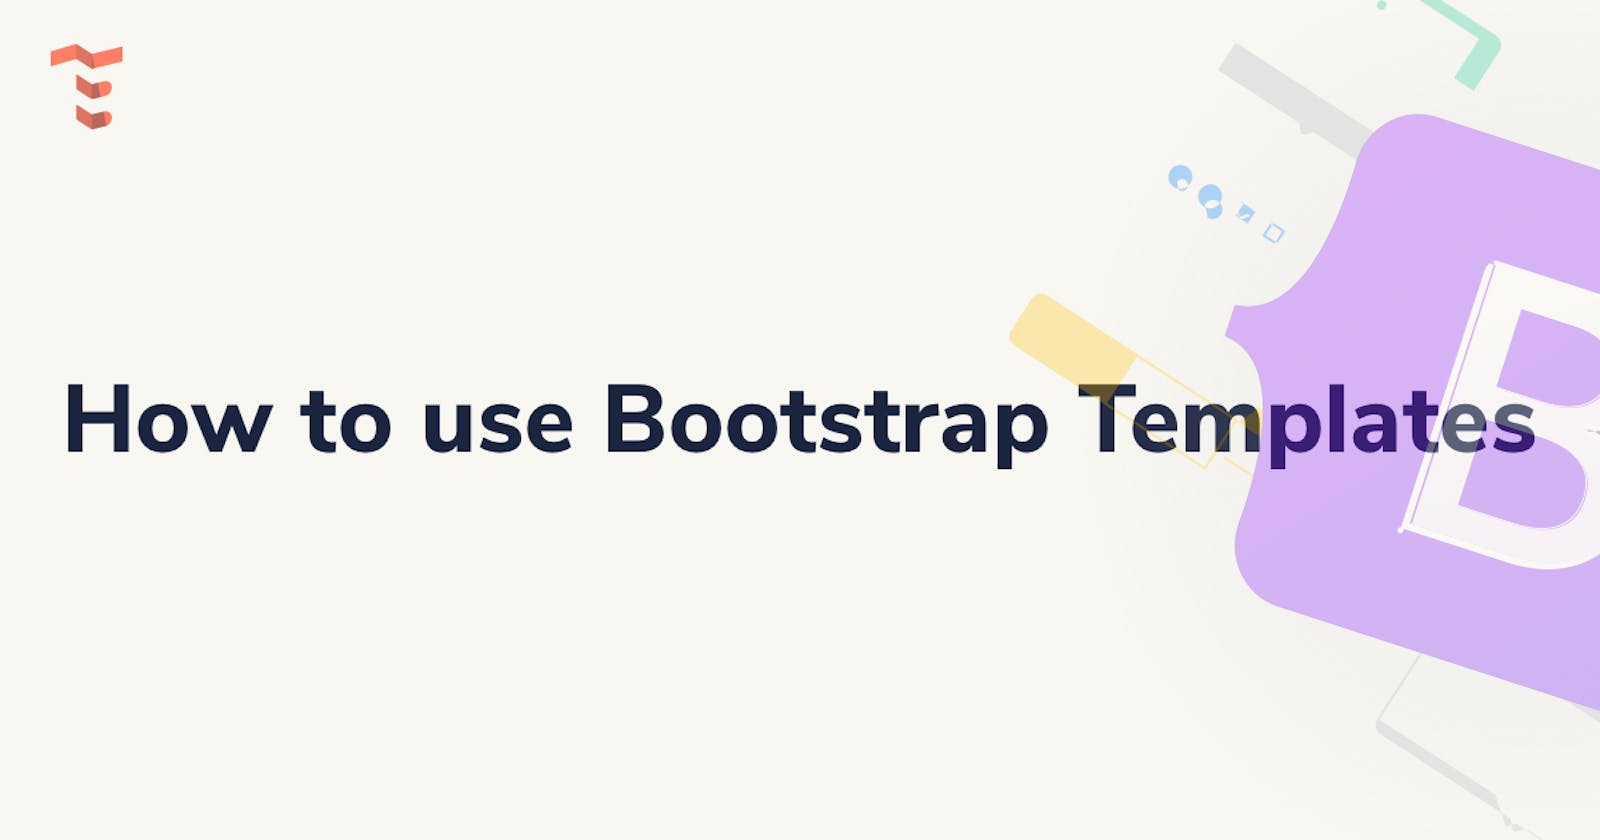 How to use Bootstrap templates